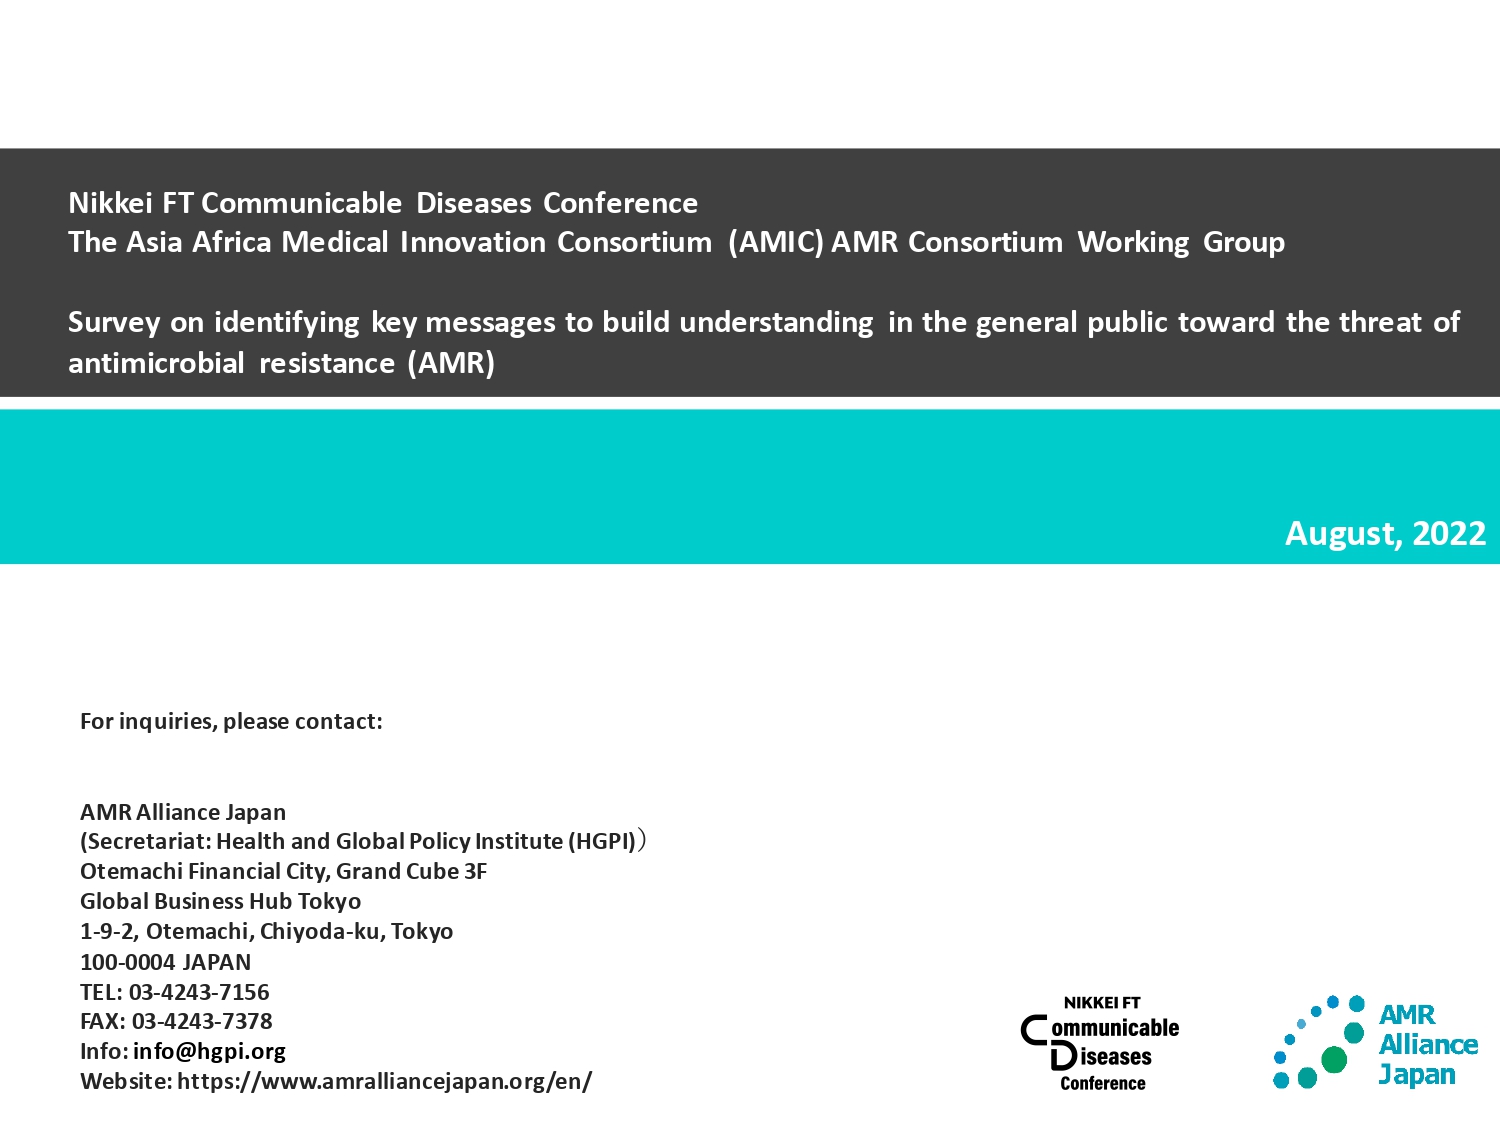 [Research Report] Survey to Identify Key Messages for Public Understanding of the Threat of Antimicrobial Resistance (AMR)(August 25, 2022)